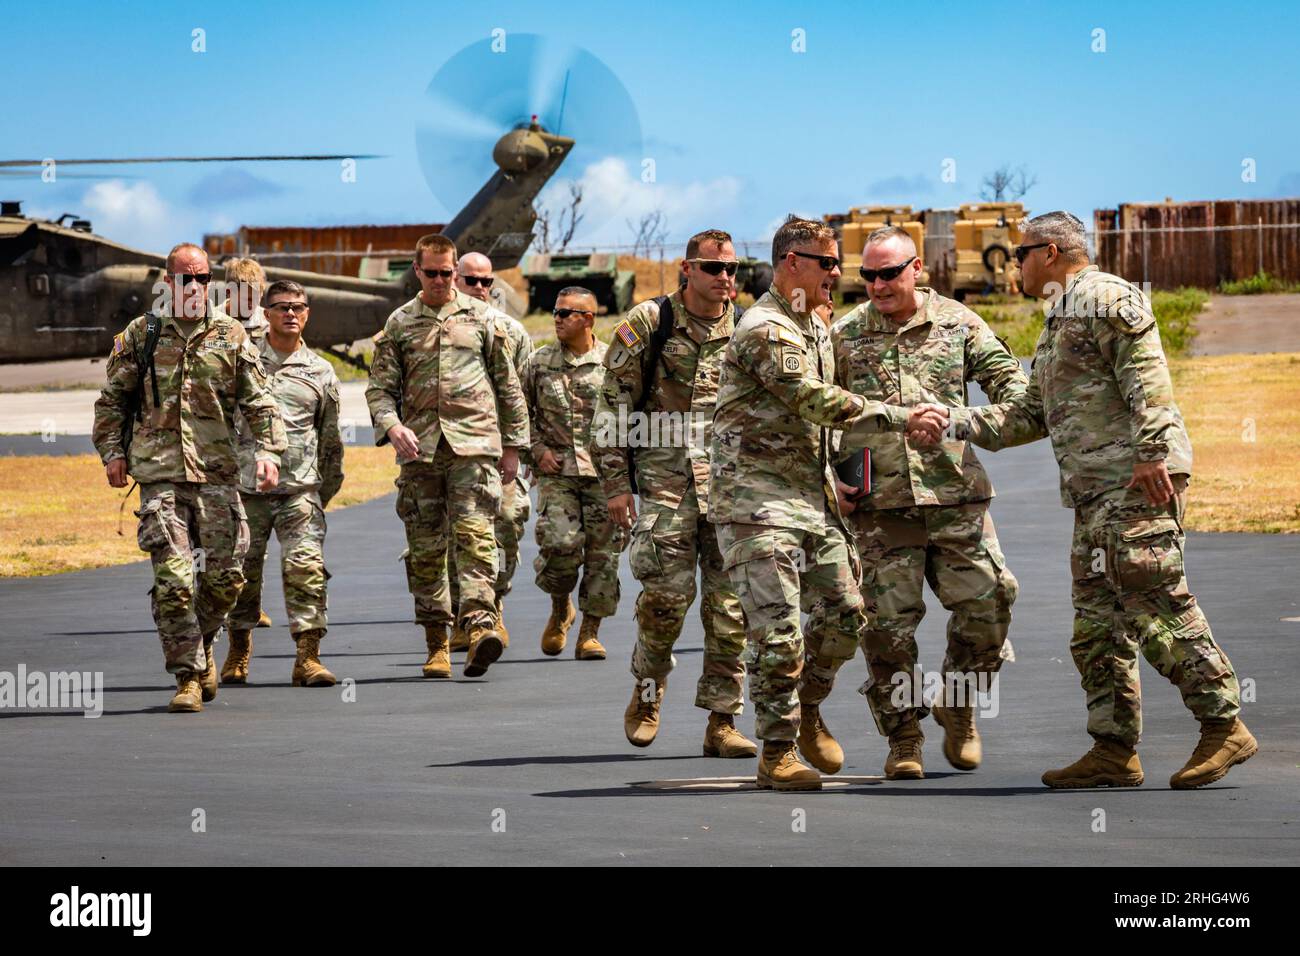 U.S. Army Gen. Charles A. Flynn, commanding general of the U.S. Army Pacific, greets the command element of the Combined Joint Task Force 50 (CJTF-50) at the Hawaii Army National Guard Puunene Armory, Maui, on August 15, 2023. Members of CJTF-50 from the Hawaii Army and Air National Guard, U.S. Army Active Duty and Reserve are actively supporting Maui County authorities to provide immediate security, safety, and well-being to those affected by the wildfires to ensure unwavering support for the community of Maui and first responders. Photo by Staff Sgt. Matthew A. Foster/U.S. Army National Guar Stock Photo